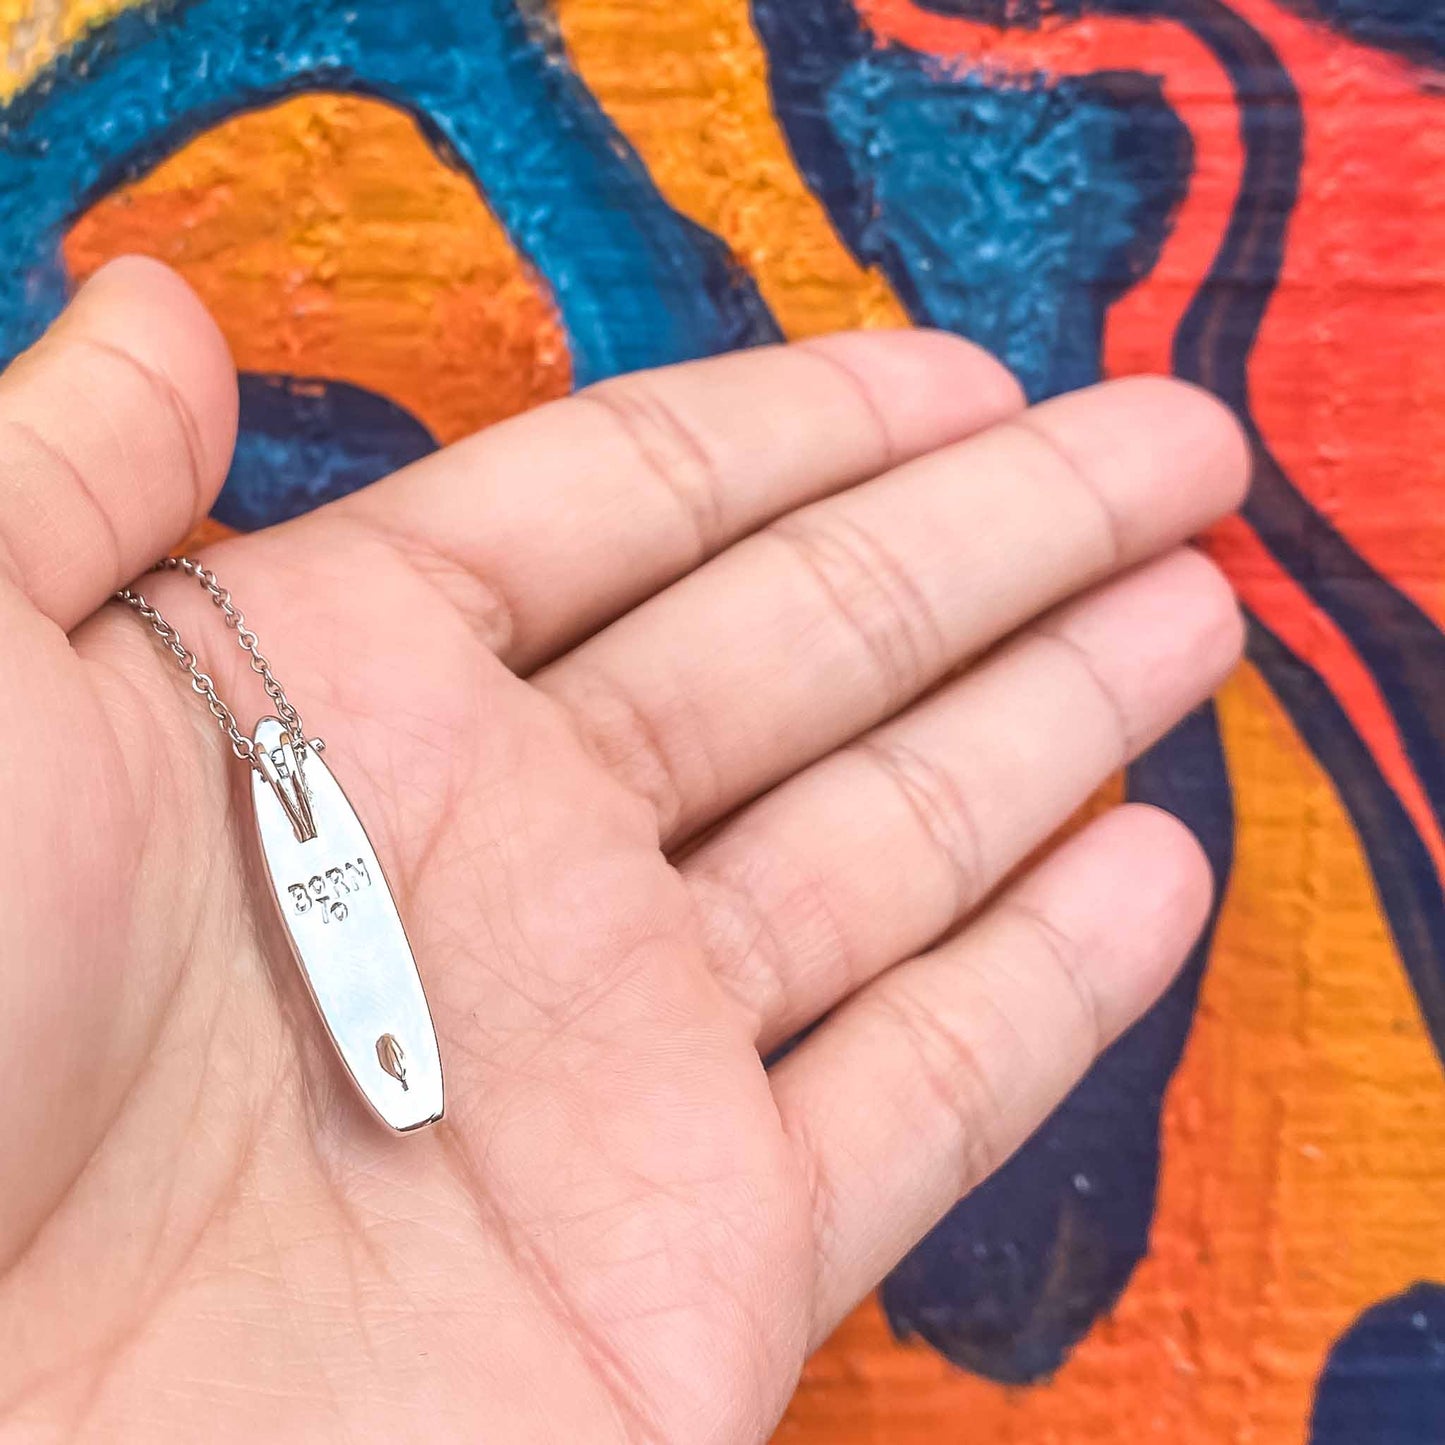 Looking for places to buy or rent a paddle board? This stand up paddle board pendant will be the best and highest performance SUP you'll ever find. Take your paddle board with you, even when you're not surfing, racing or touring. Shop November's birthstone SUP jewelry online or at a surf shop near you.